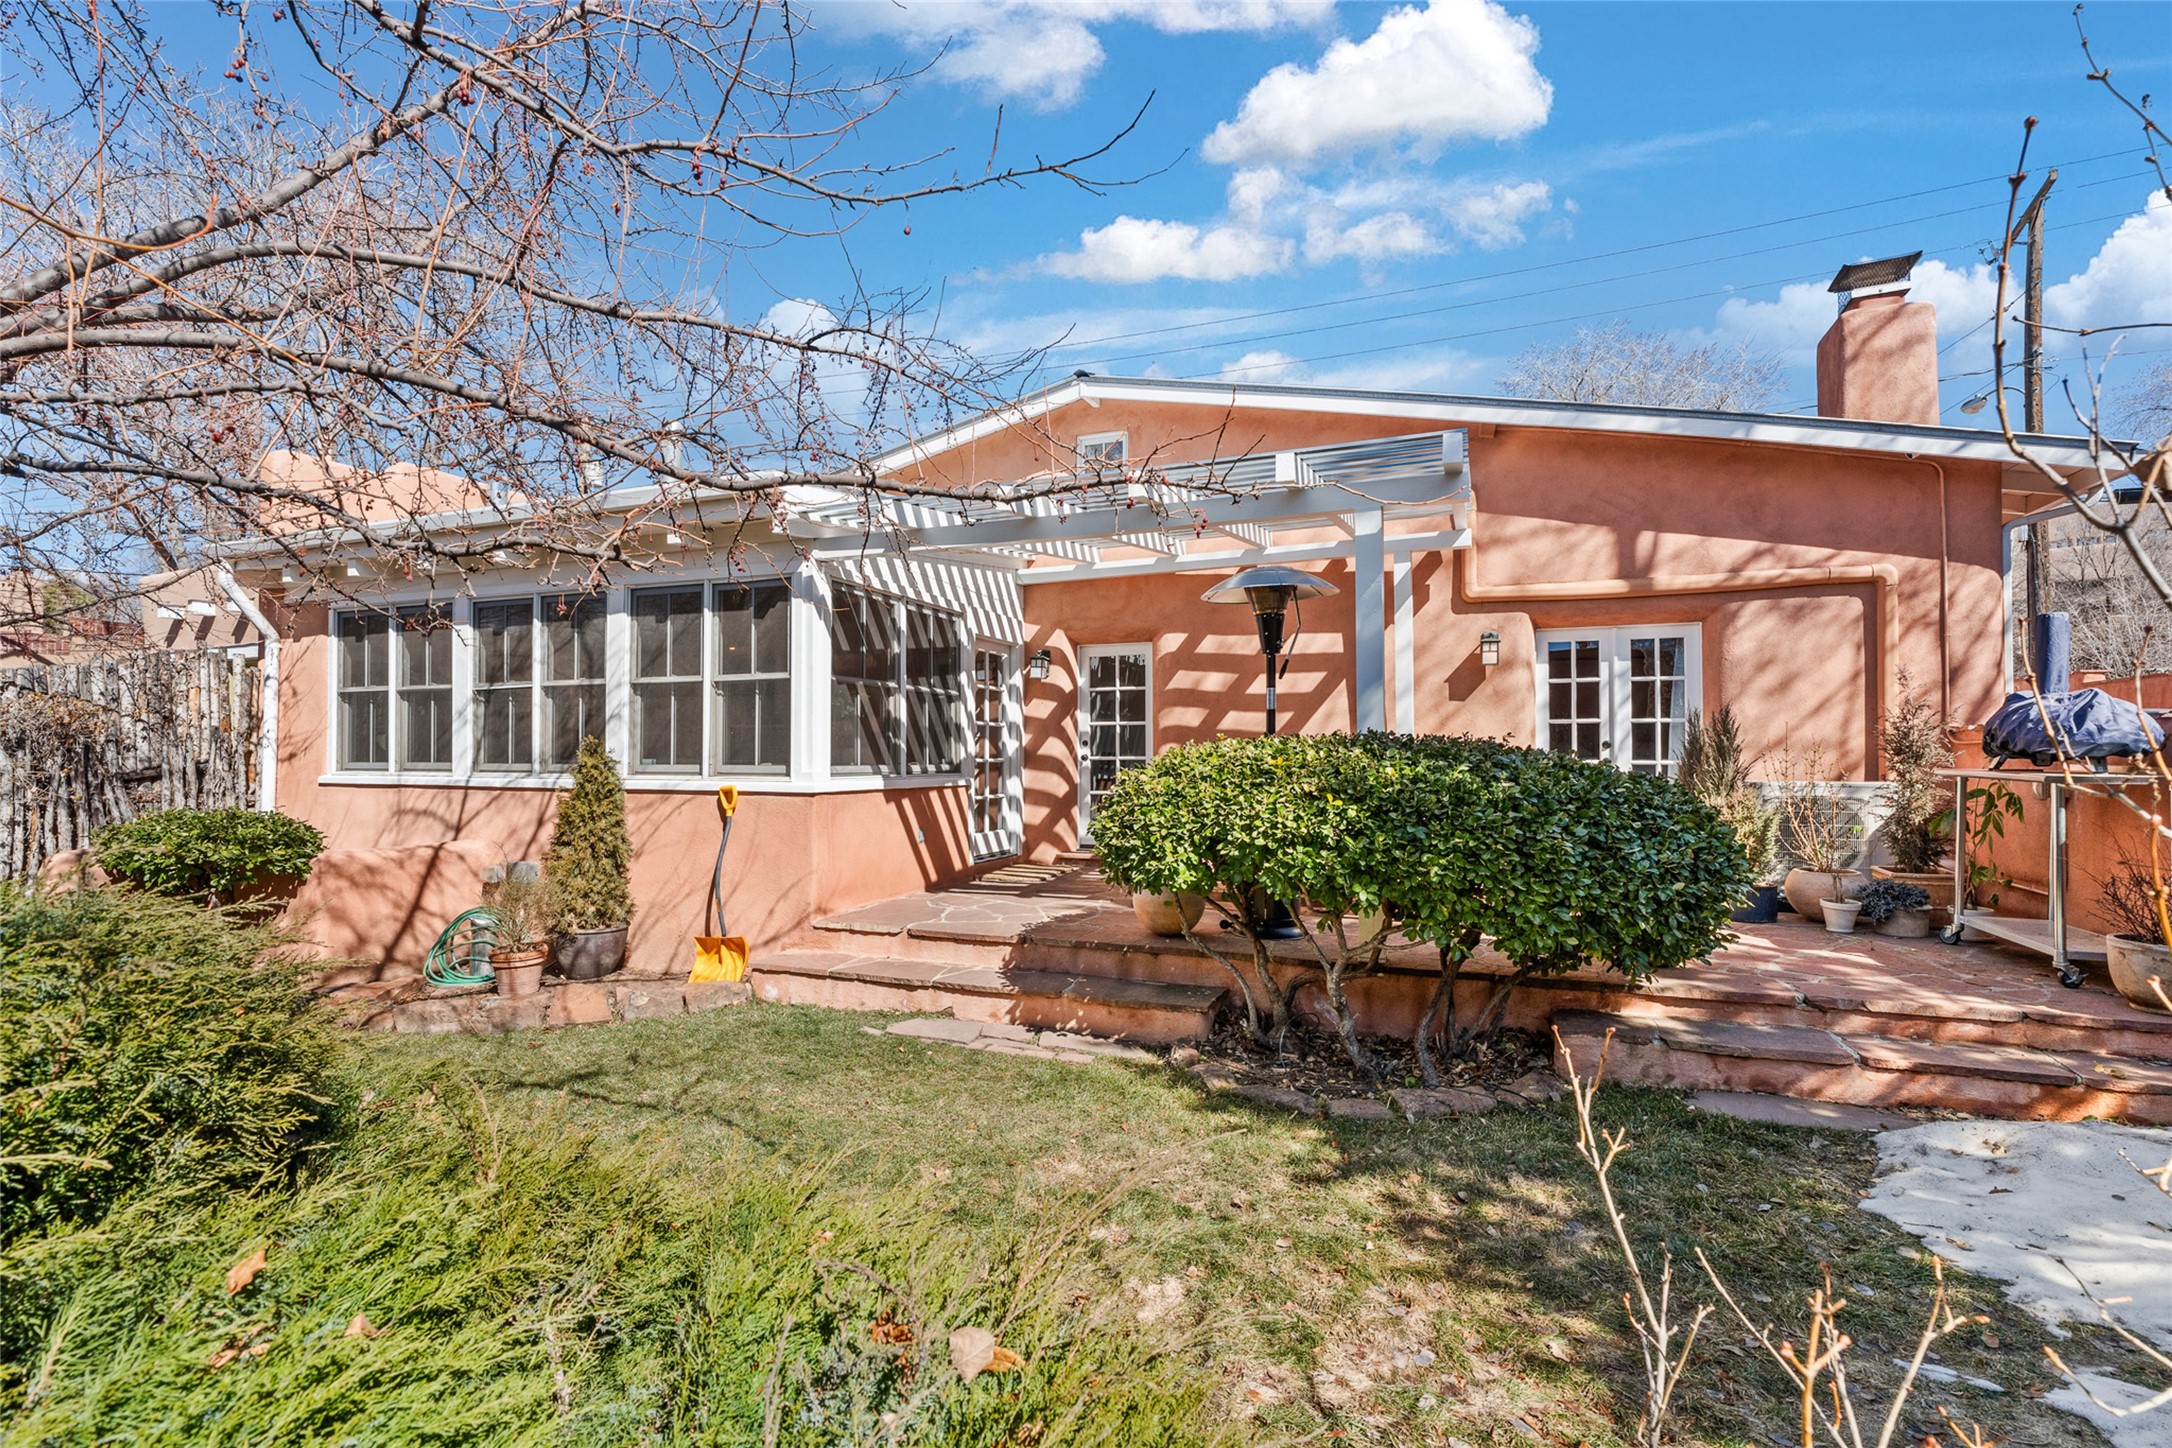 864 E Palace Avenue, Santa Fe, New Mexico 87501, 2 Bedrooms Bedrooms, ,2 BathroomsBathrooms,Residential,For Sale,864 E Palace Avenue,202400106